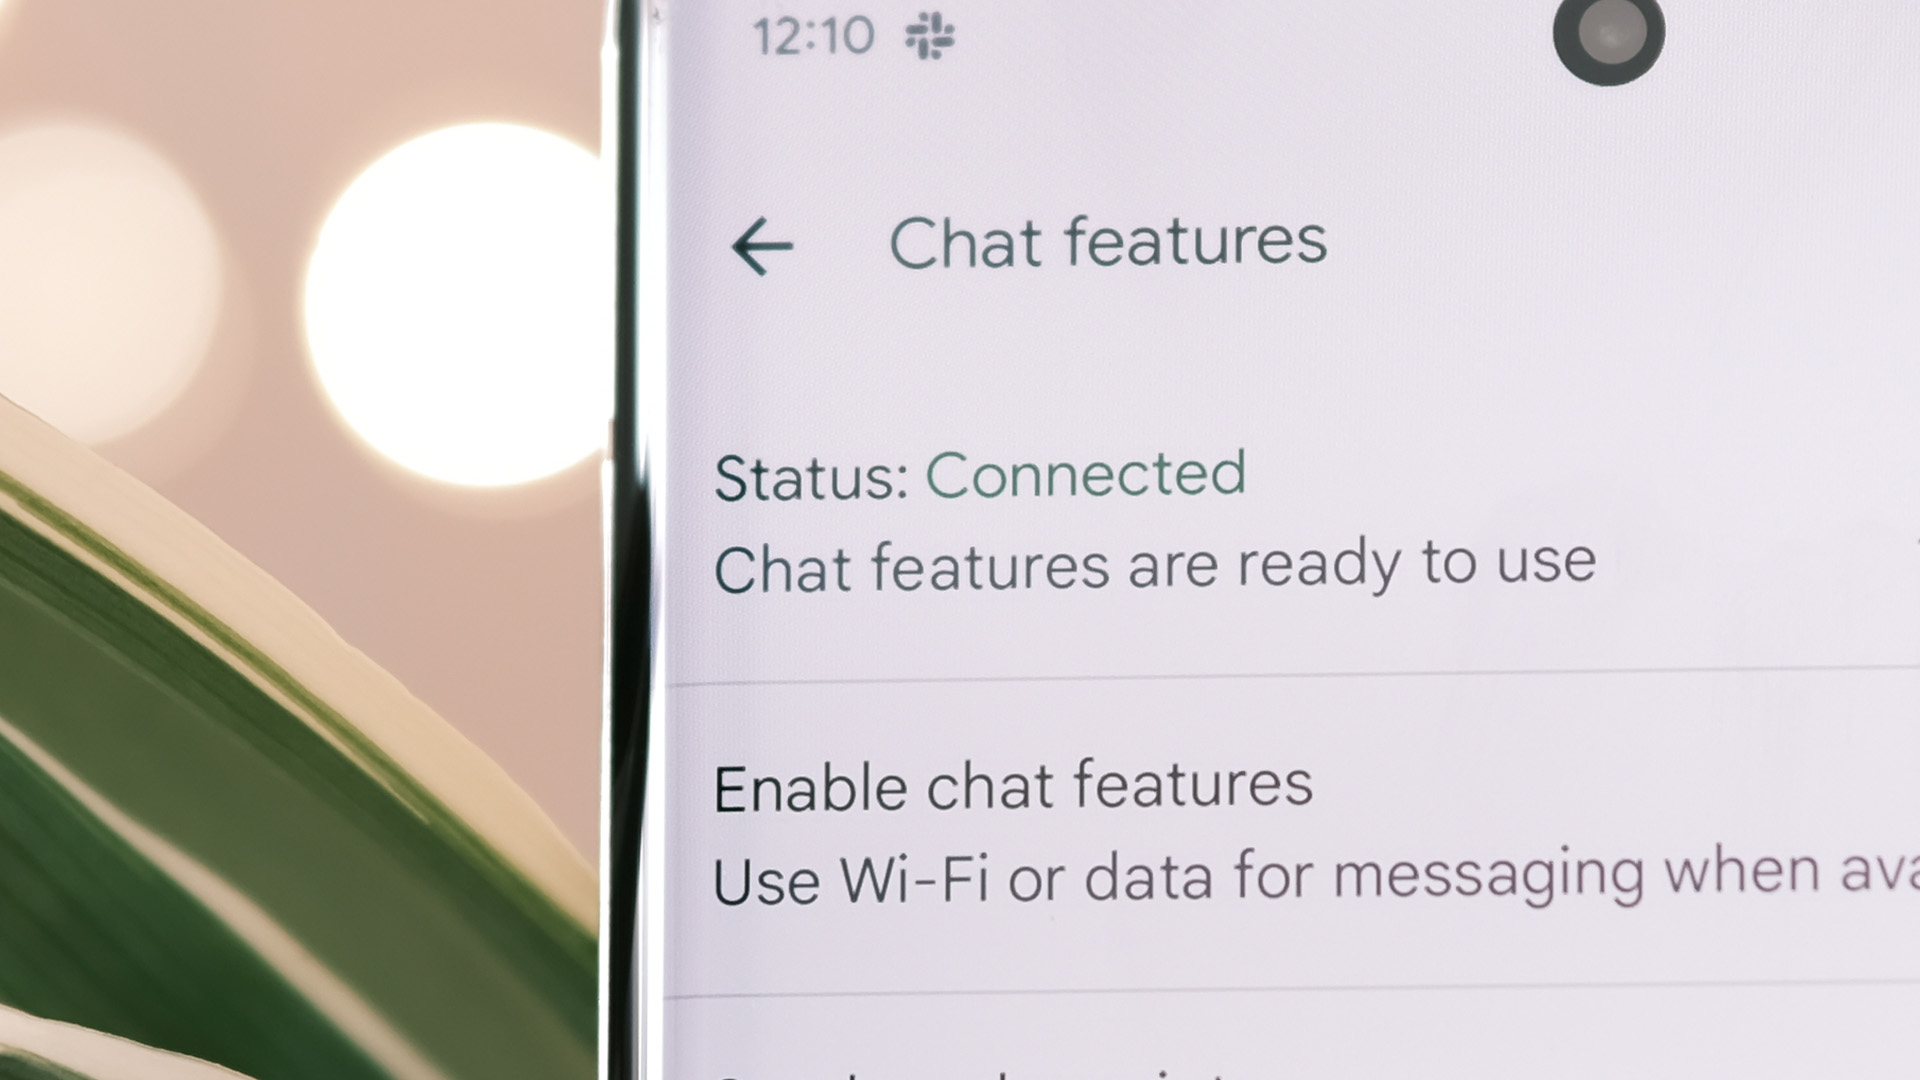 RCS chat features enabled